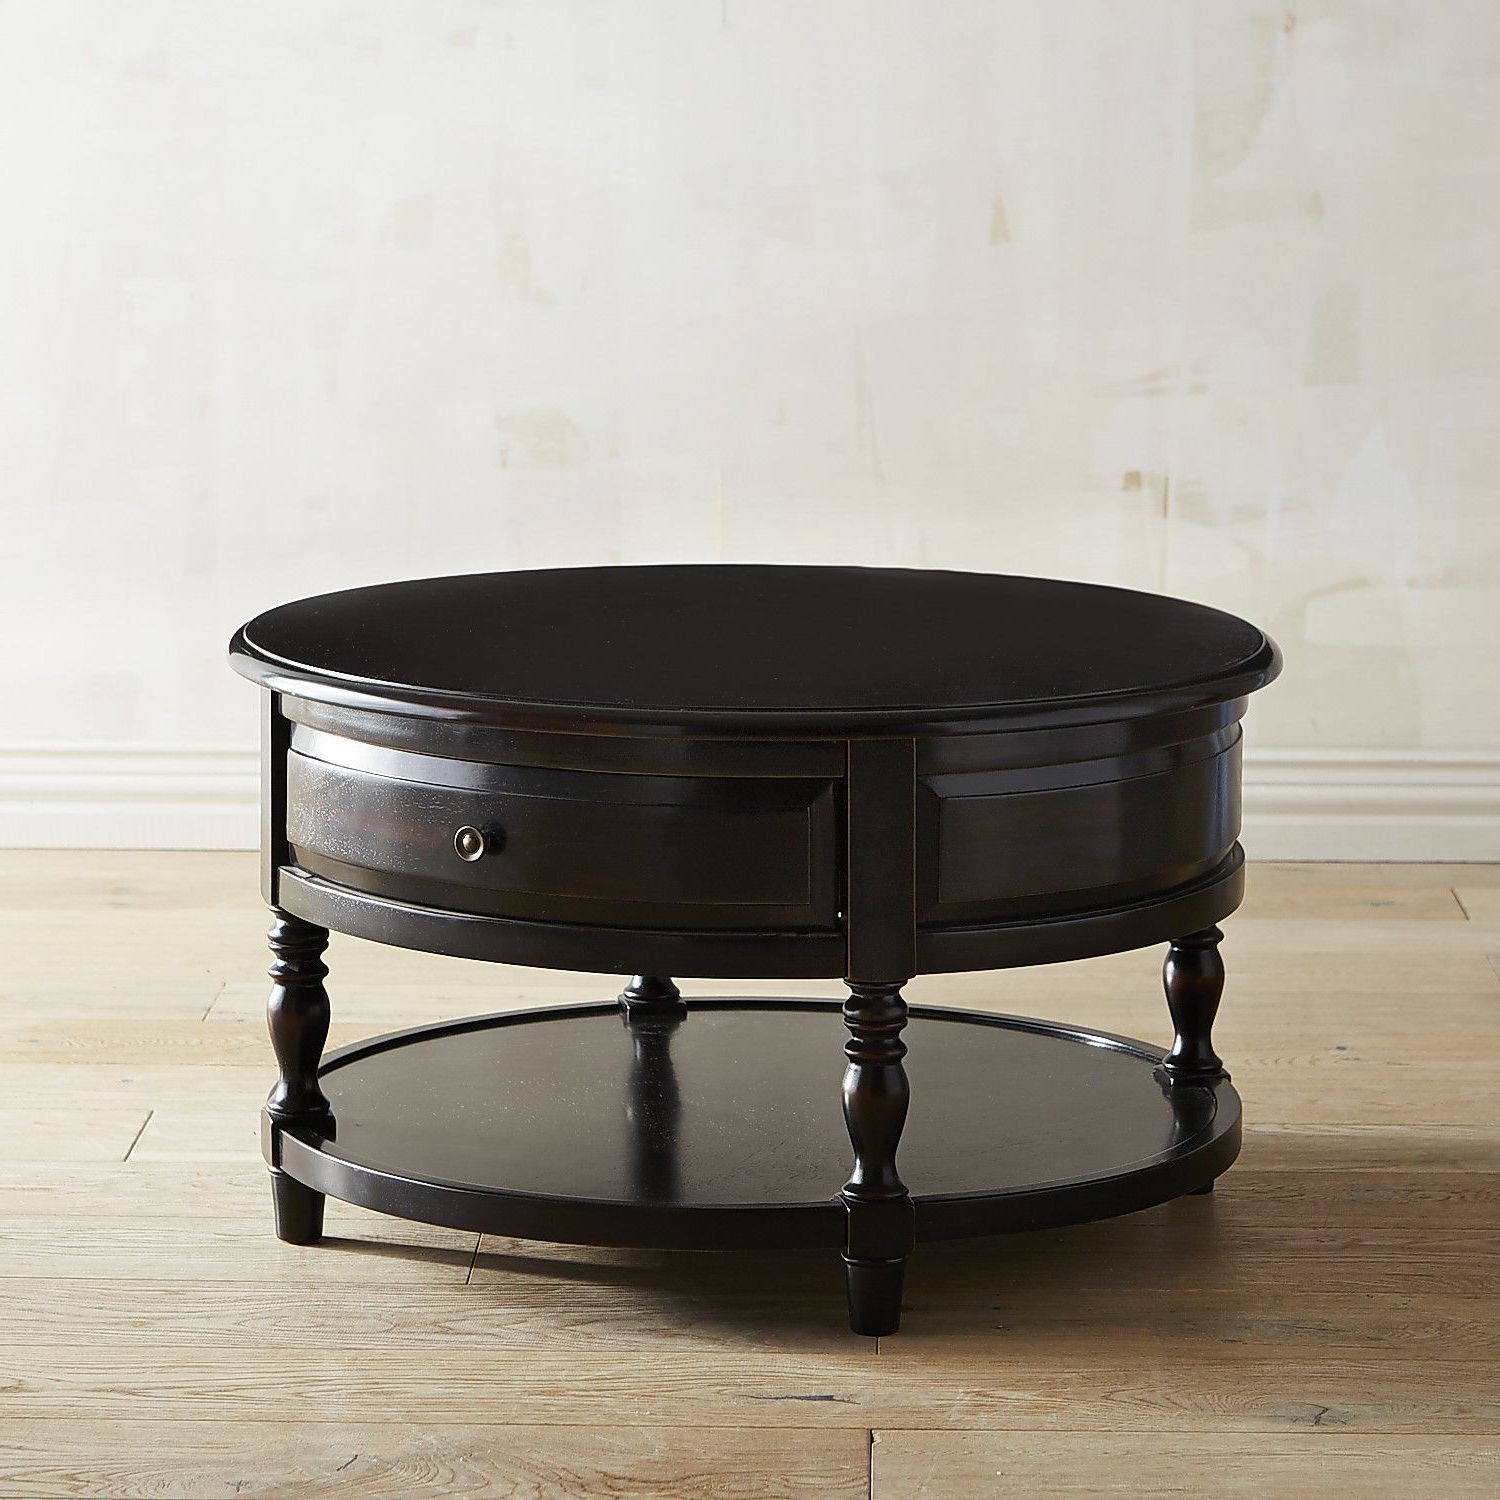 Anywhere Rubbed Black Round Coffee Table | Round Coffee Table, Round In Full Black Round Coffee Tables (View 15 of 20)